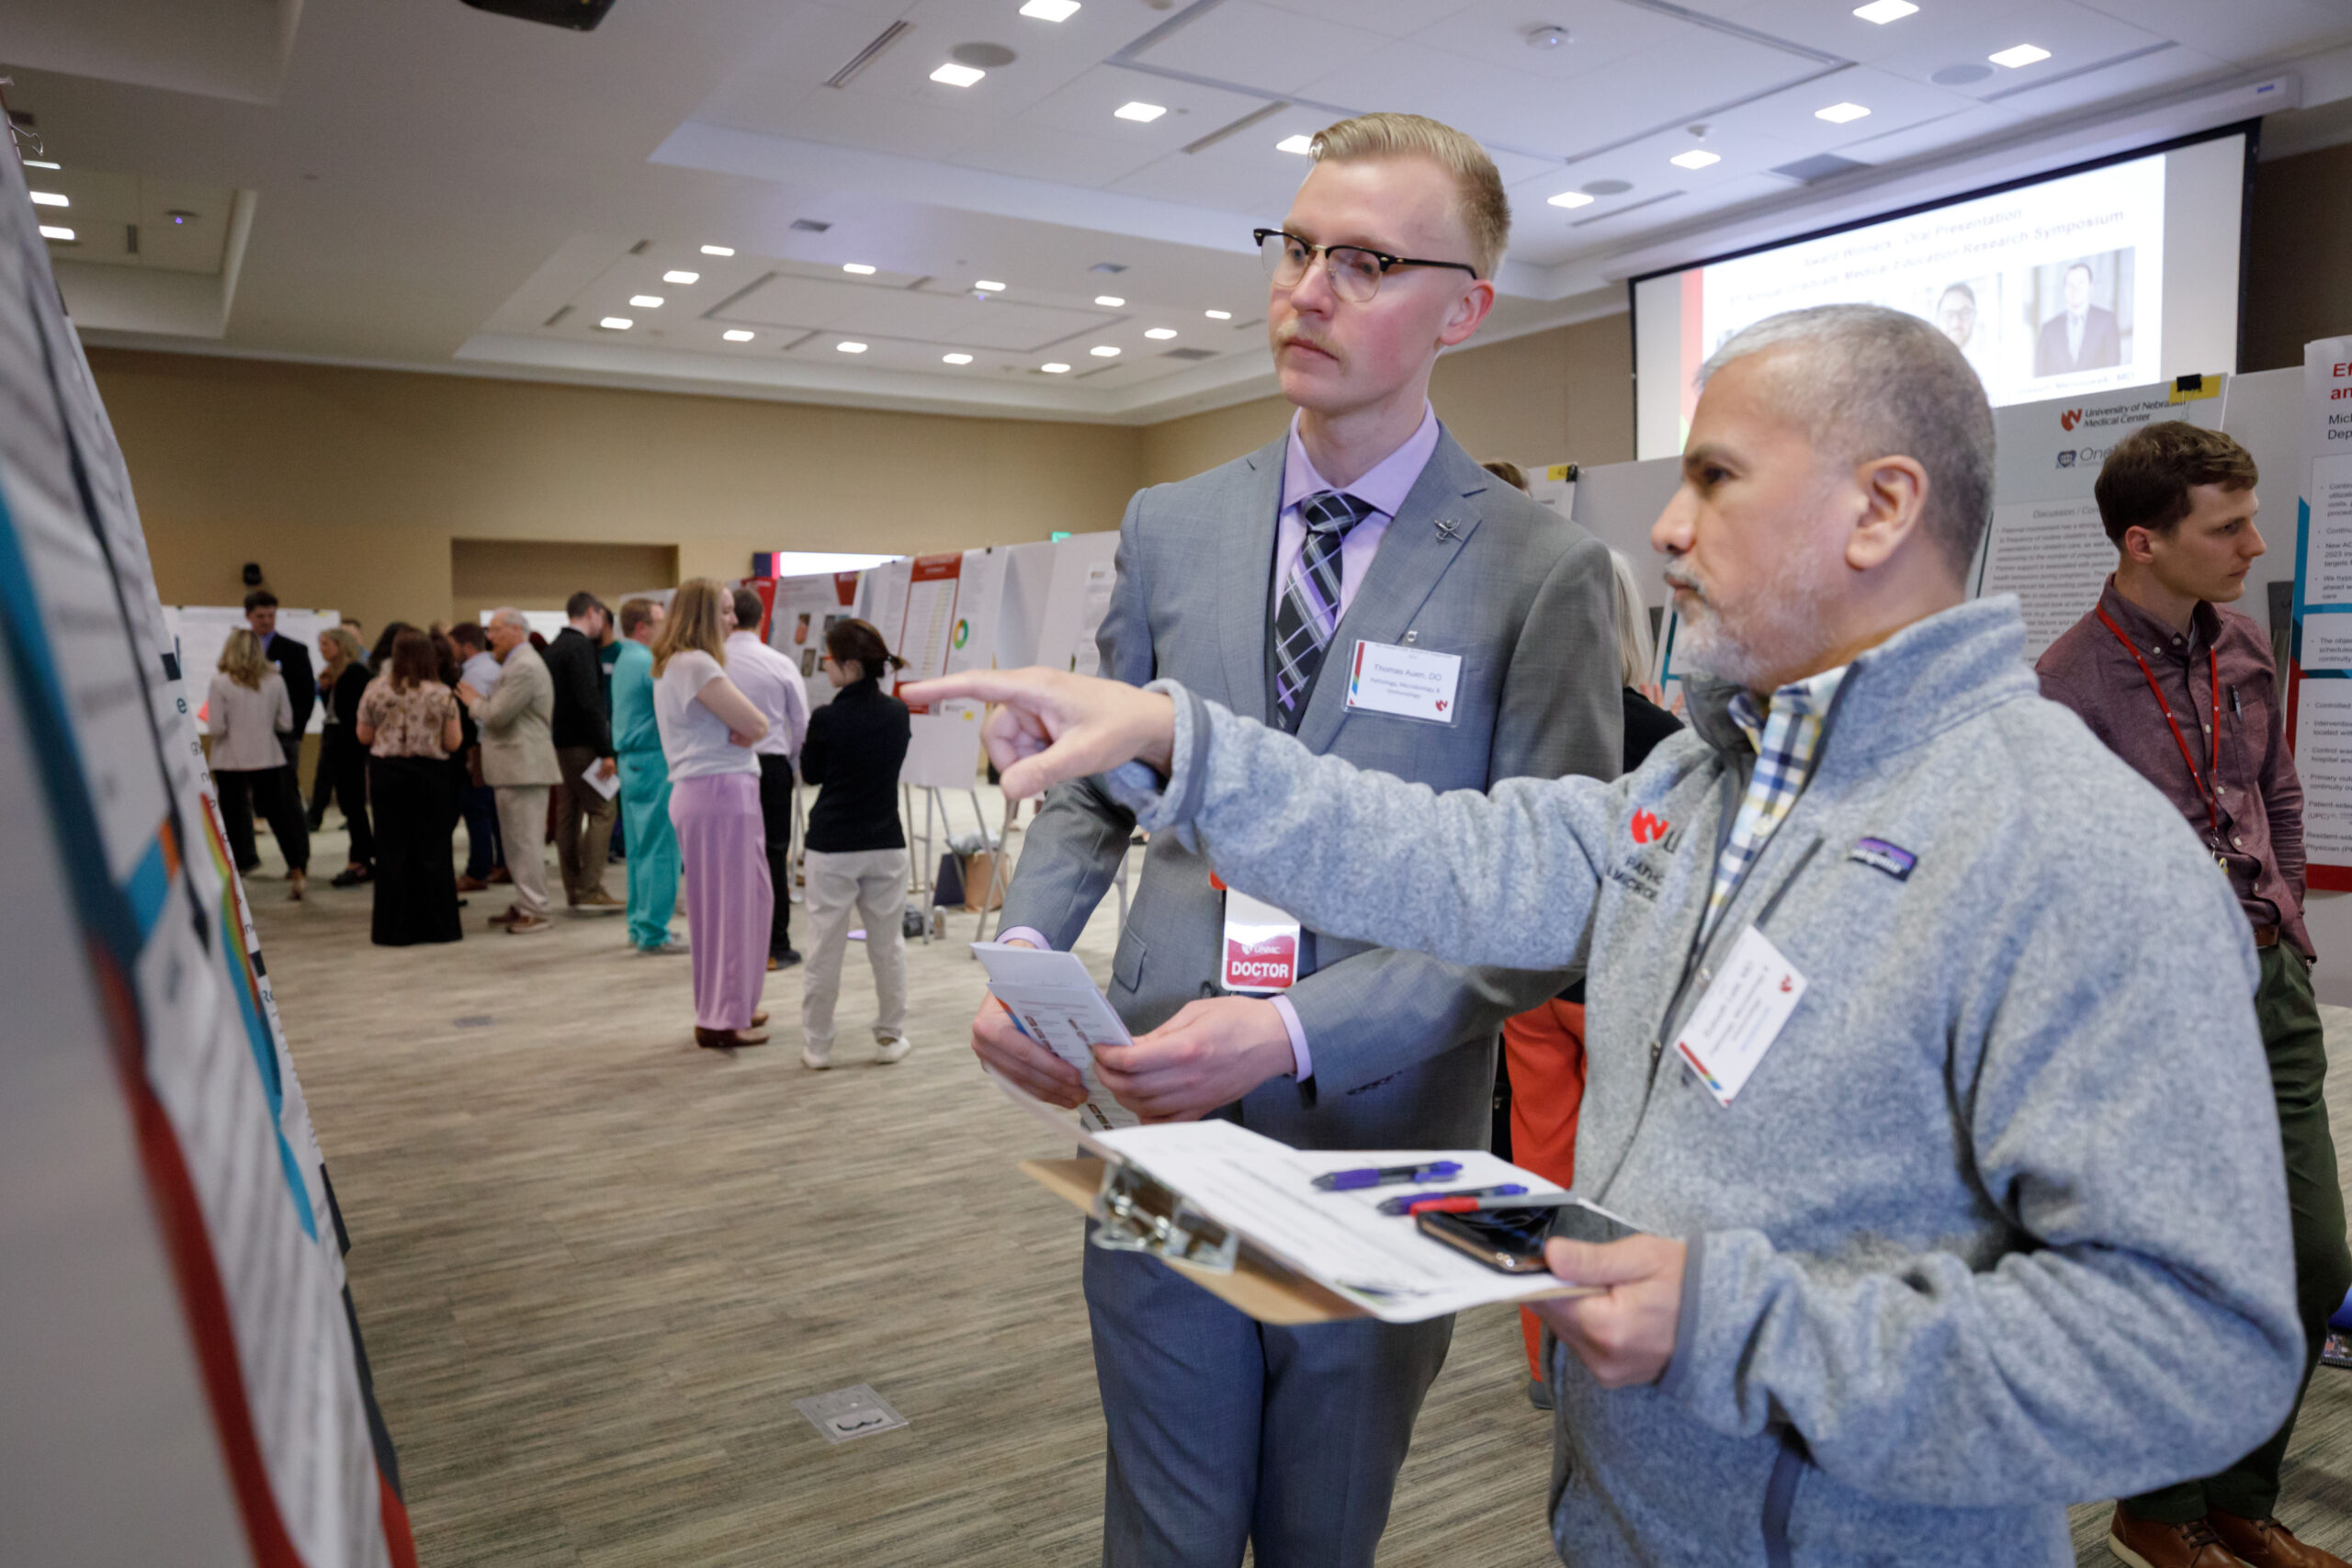 Thomas Auen&comma; DO&comma; left&comma; a winner for oral presentation&comma; reviews a poster with Subodh Lele&comma; MD